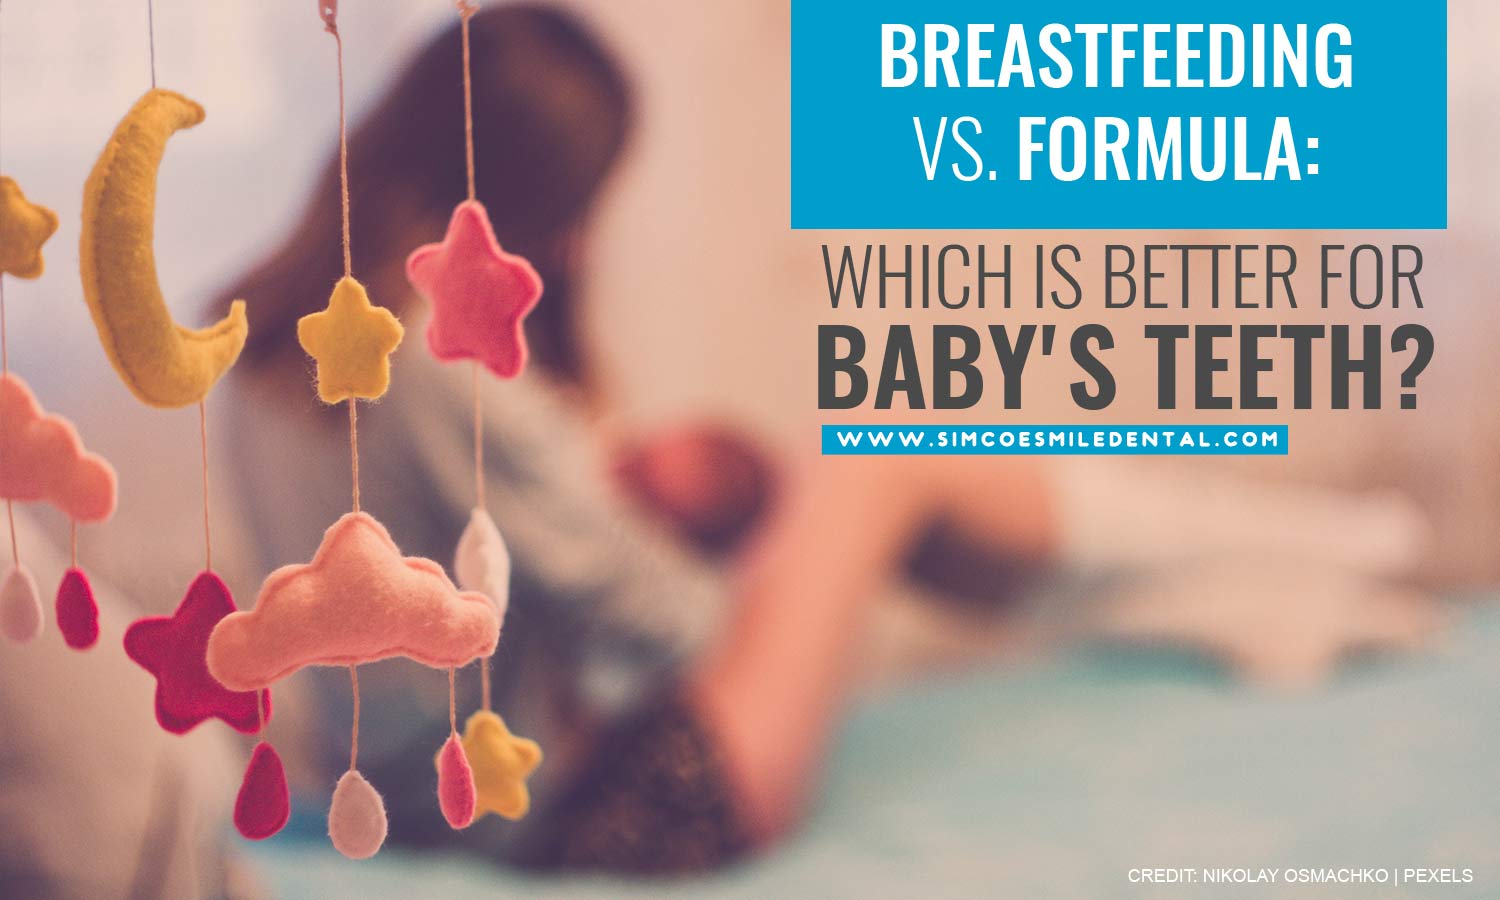 Breastfeeding vs. Formula: Which Is Better for Your Baby's Teeth?